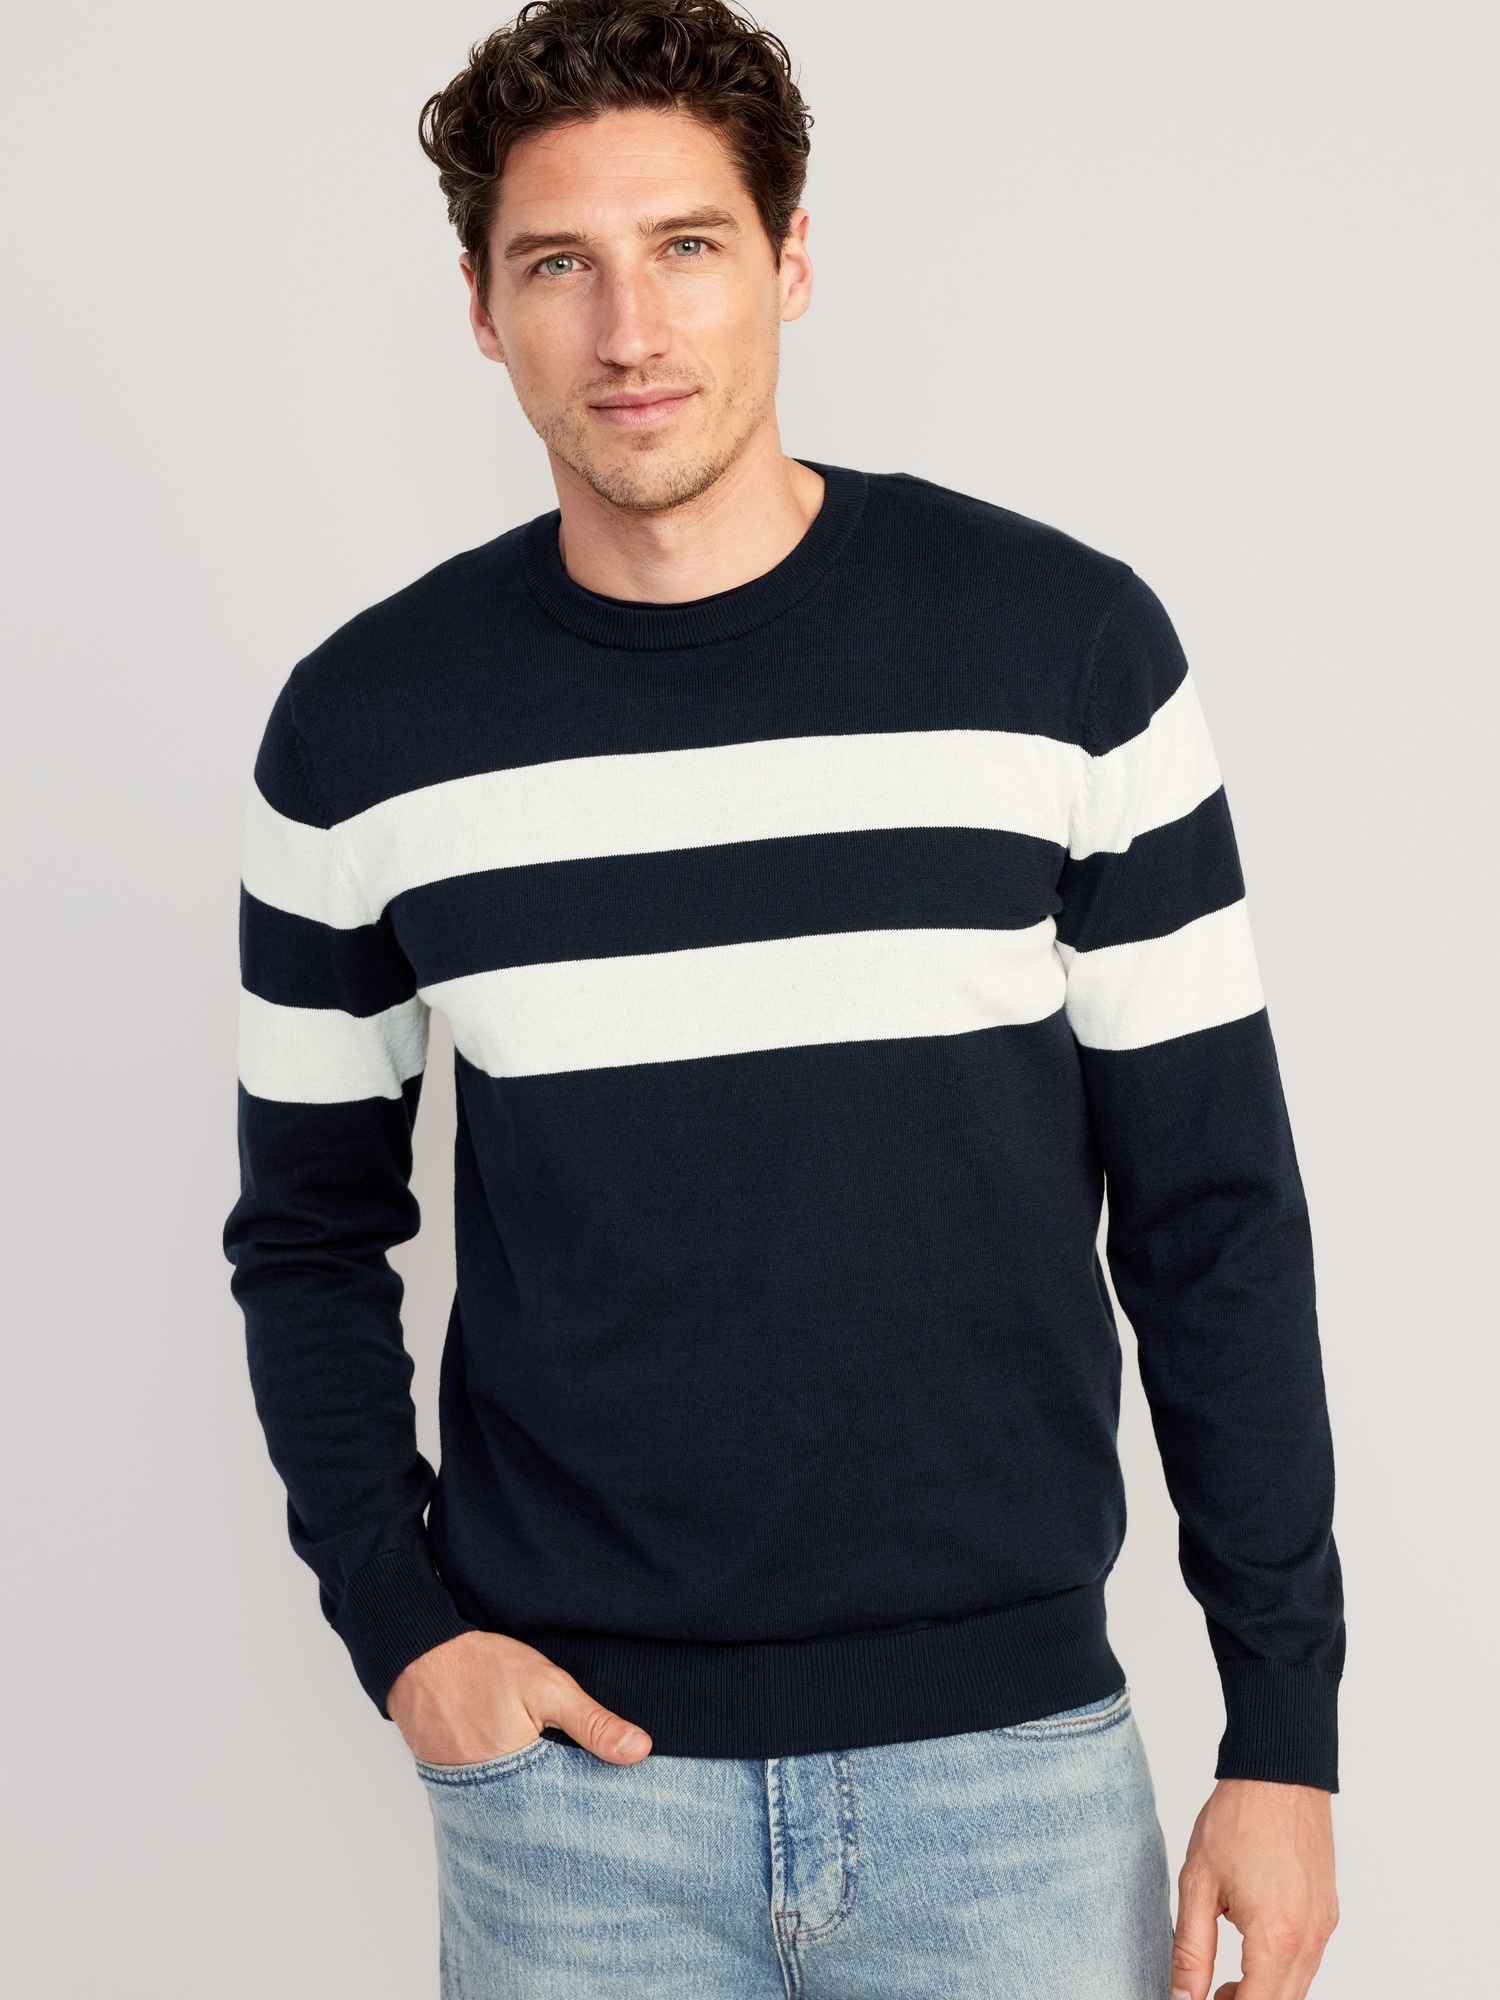 Relaxed Fit Rib-knit Sweater - Beige/striped - Men